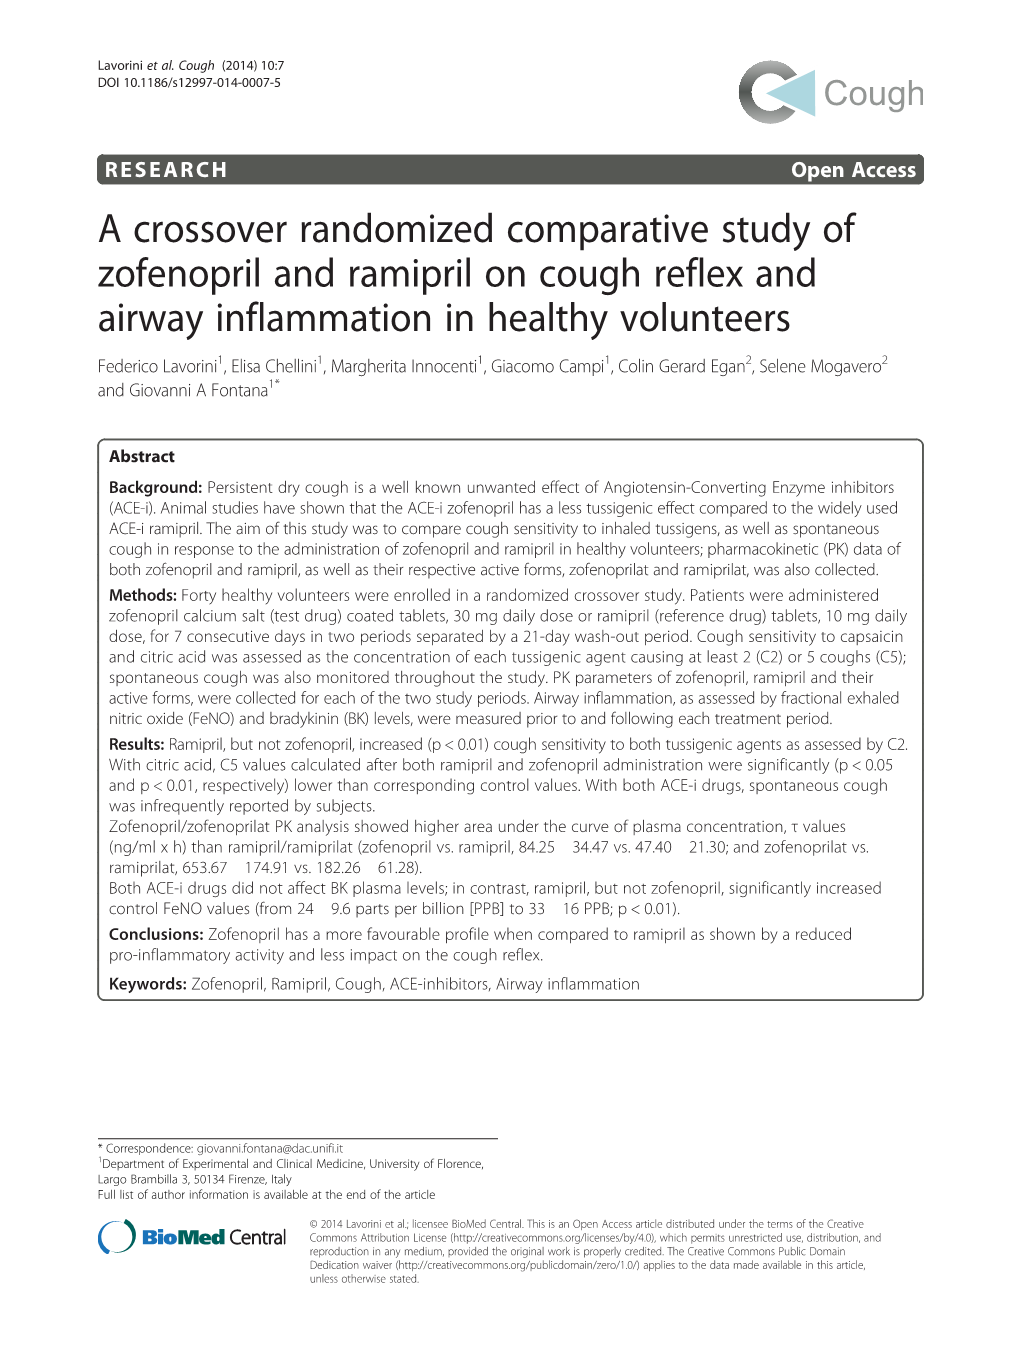 A Crossover Randomized Comparative Study of Zofenopril and Ramipril On